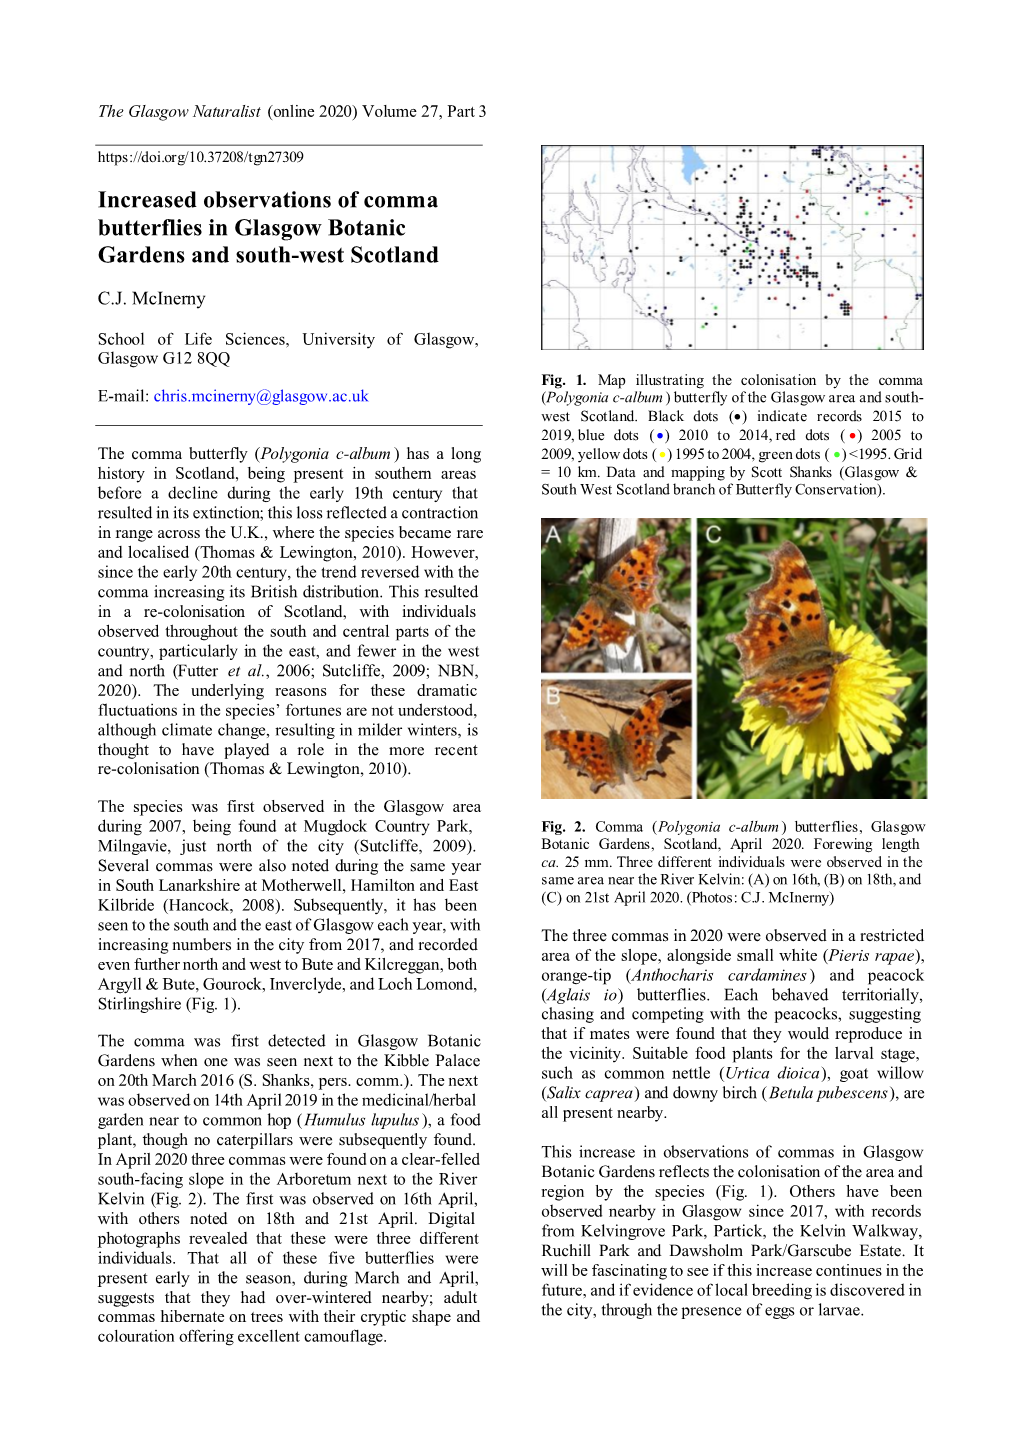 Increased Observations of Comma Butterflies in Glasgow Botanic Gardens and South-West Scotland